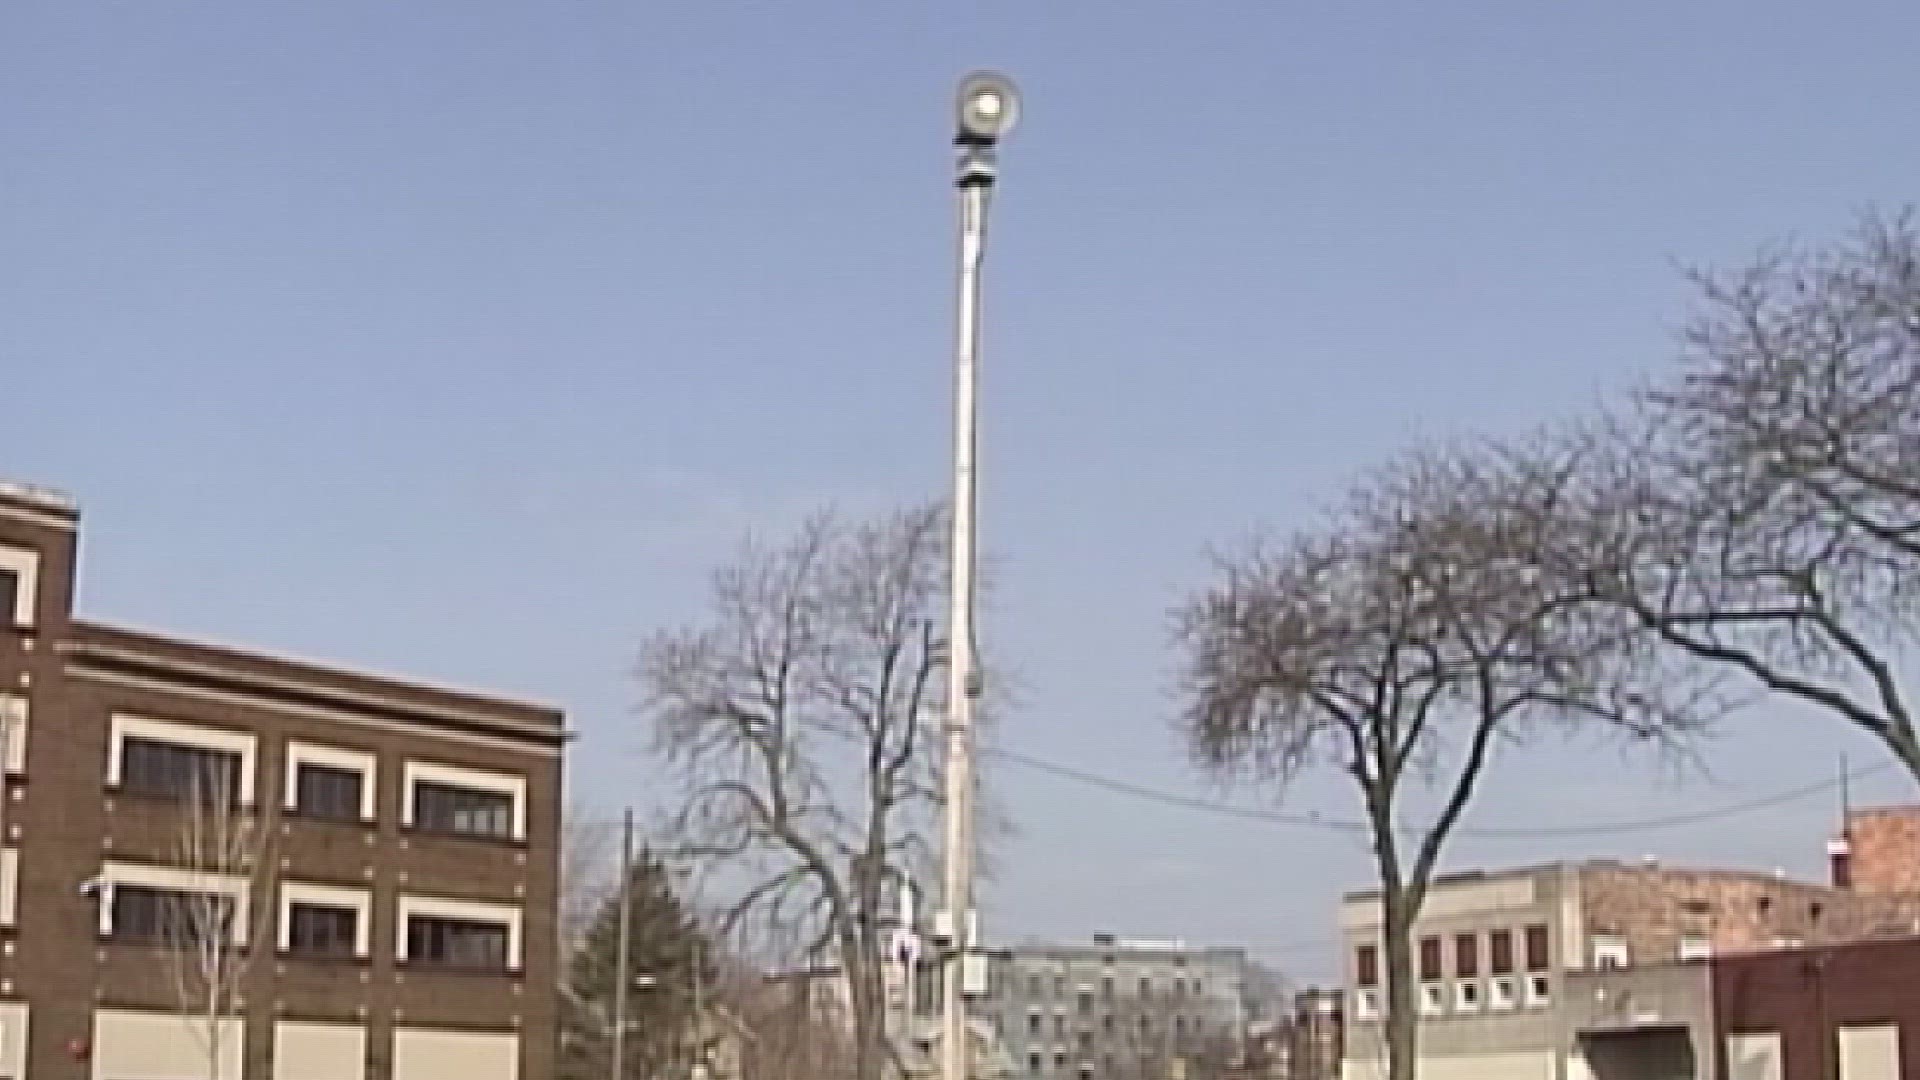 WTOL 11 Meteorologist Diane Phillips talks with the Wood County EMA about how outdoor warning sirens can signal much more than tornado warnings.